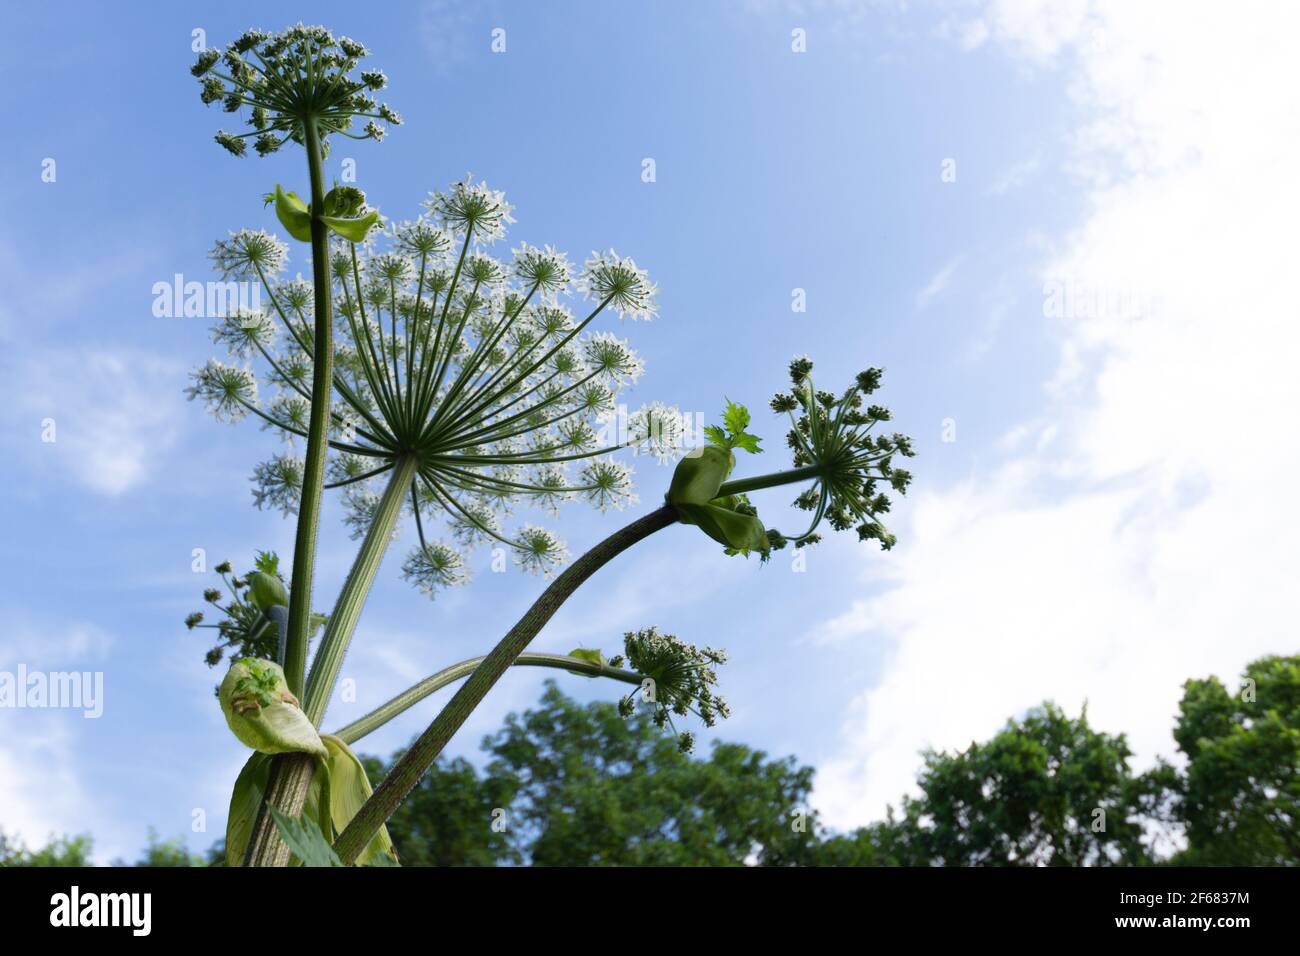 Close up, macro photo of single poisonous plant Heracleum sibiricum. Also known as common names hogweed and cow parsnip. Stock Photo